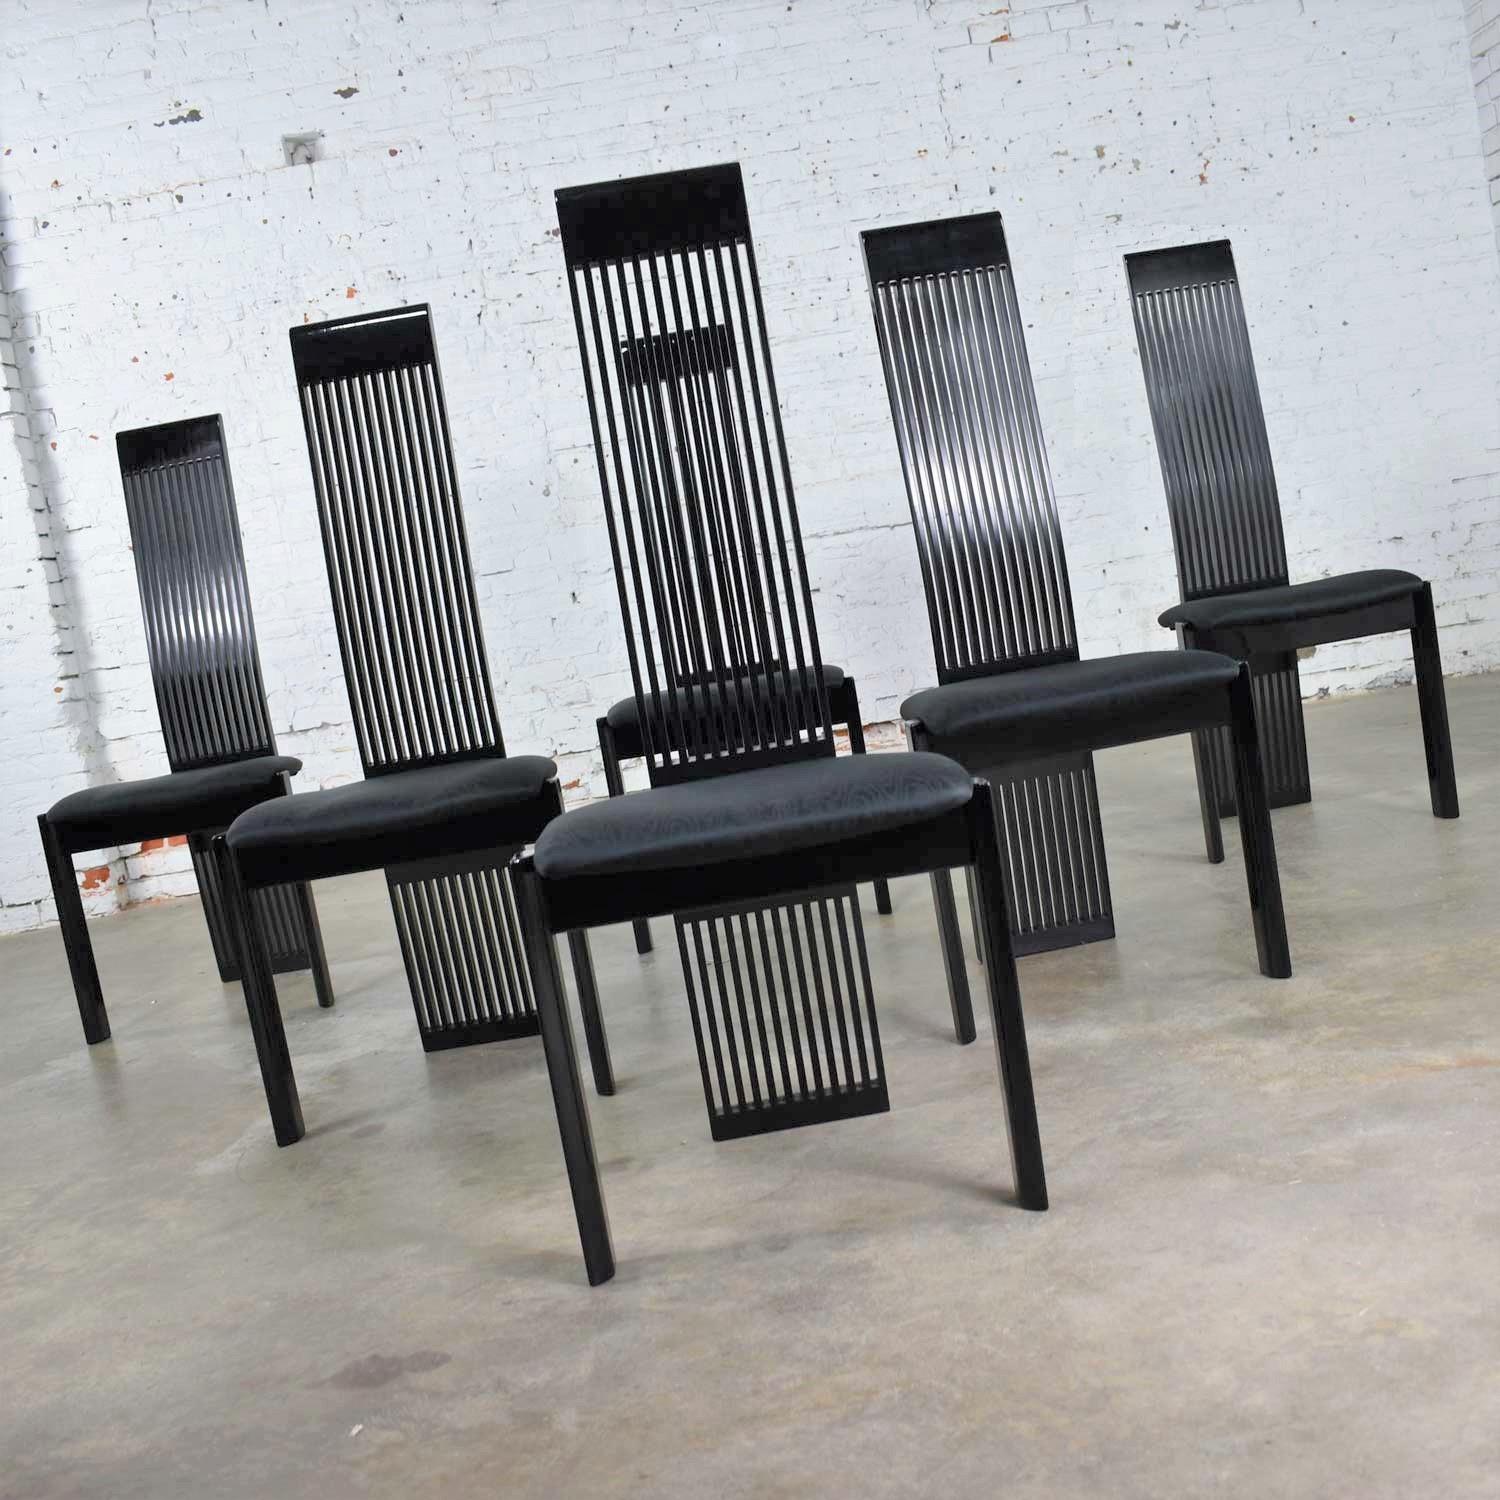 Extraordinary set of six Postmodern black lacquer dining chairs made in Italy by Pietro Costantini. And most likely imported and offered by Ello although they do not have the Ello tag attached. They are in wonderful vintage condition. They had some